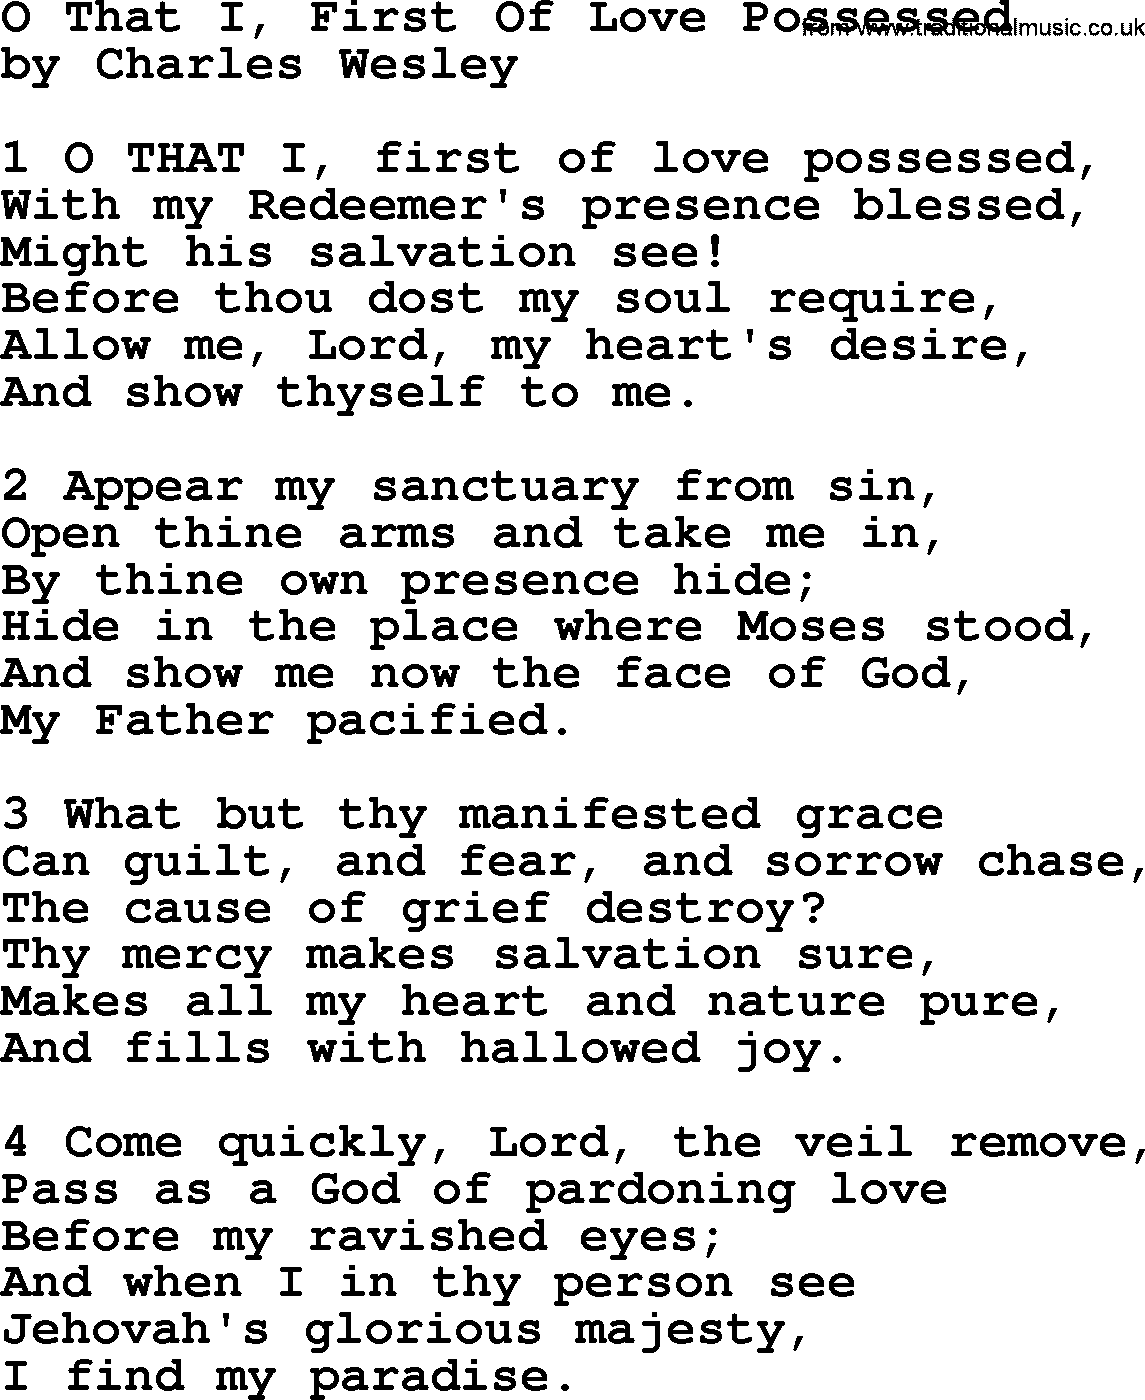 Charles Wesley hymn: O That I, First Of Love Possessed, lyrics